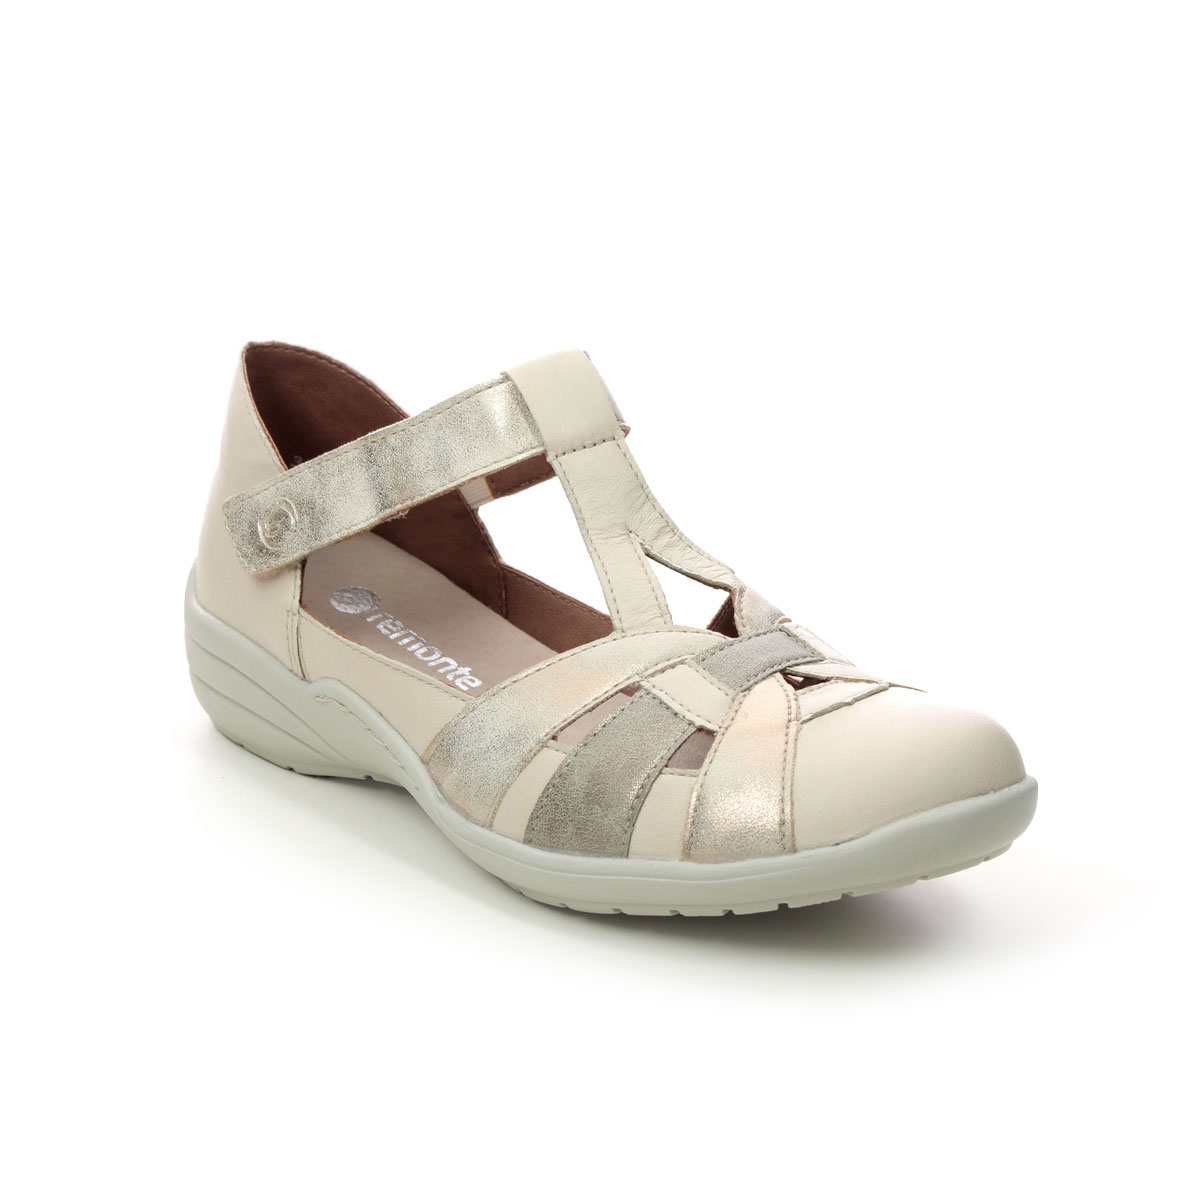 Remonte Bertavall Beige Leather Womens Closed Toe Sandals R7601-80 In Size 37 In Plain Beige Leather